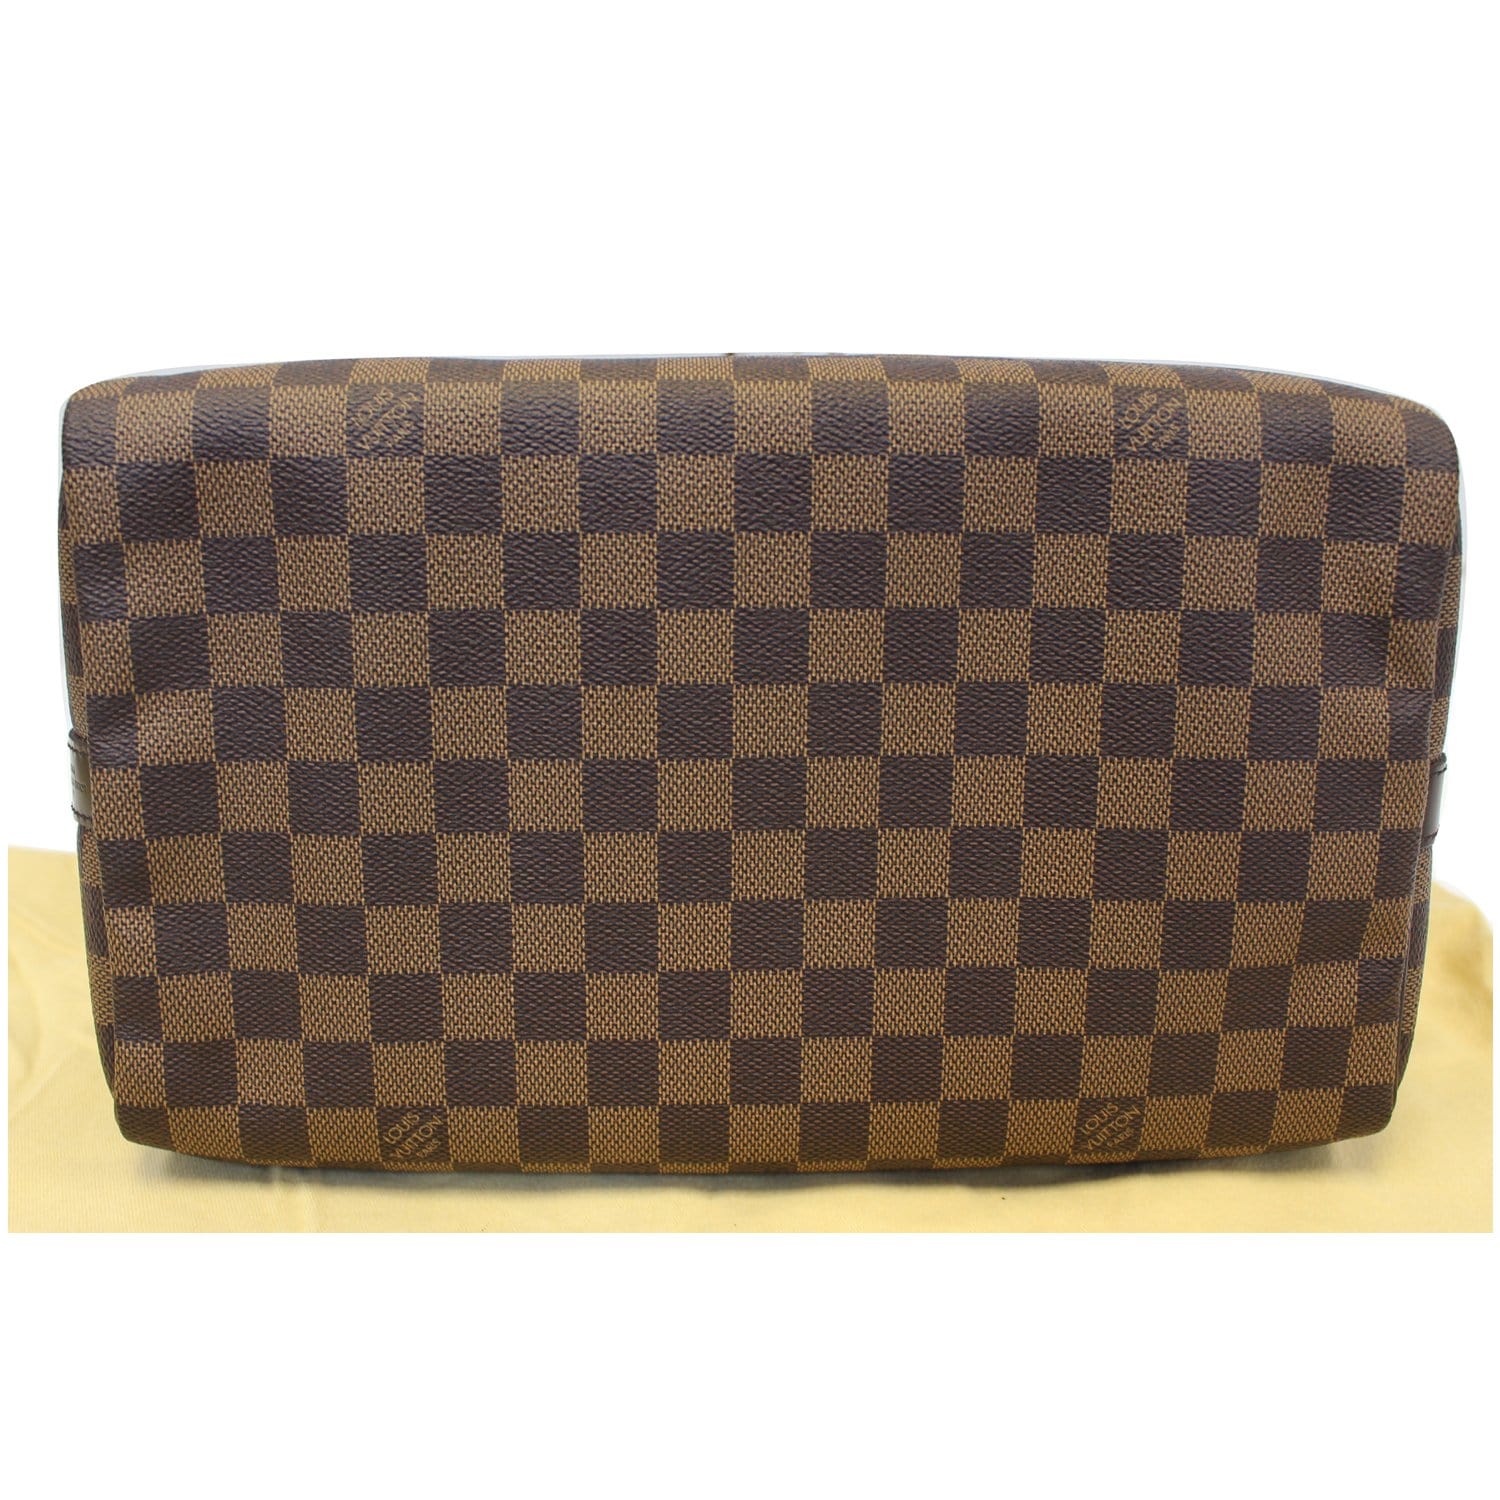 Louis Vuitton Damier Ebene Bandouliere 30. MB0157. Made in France.